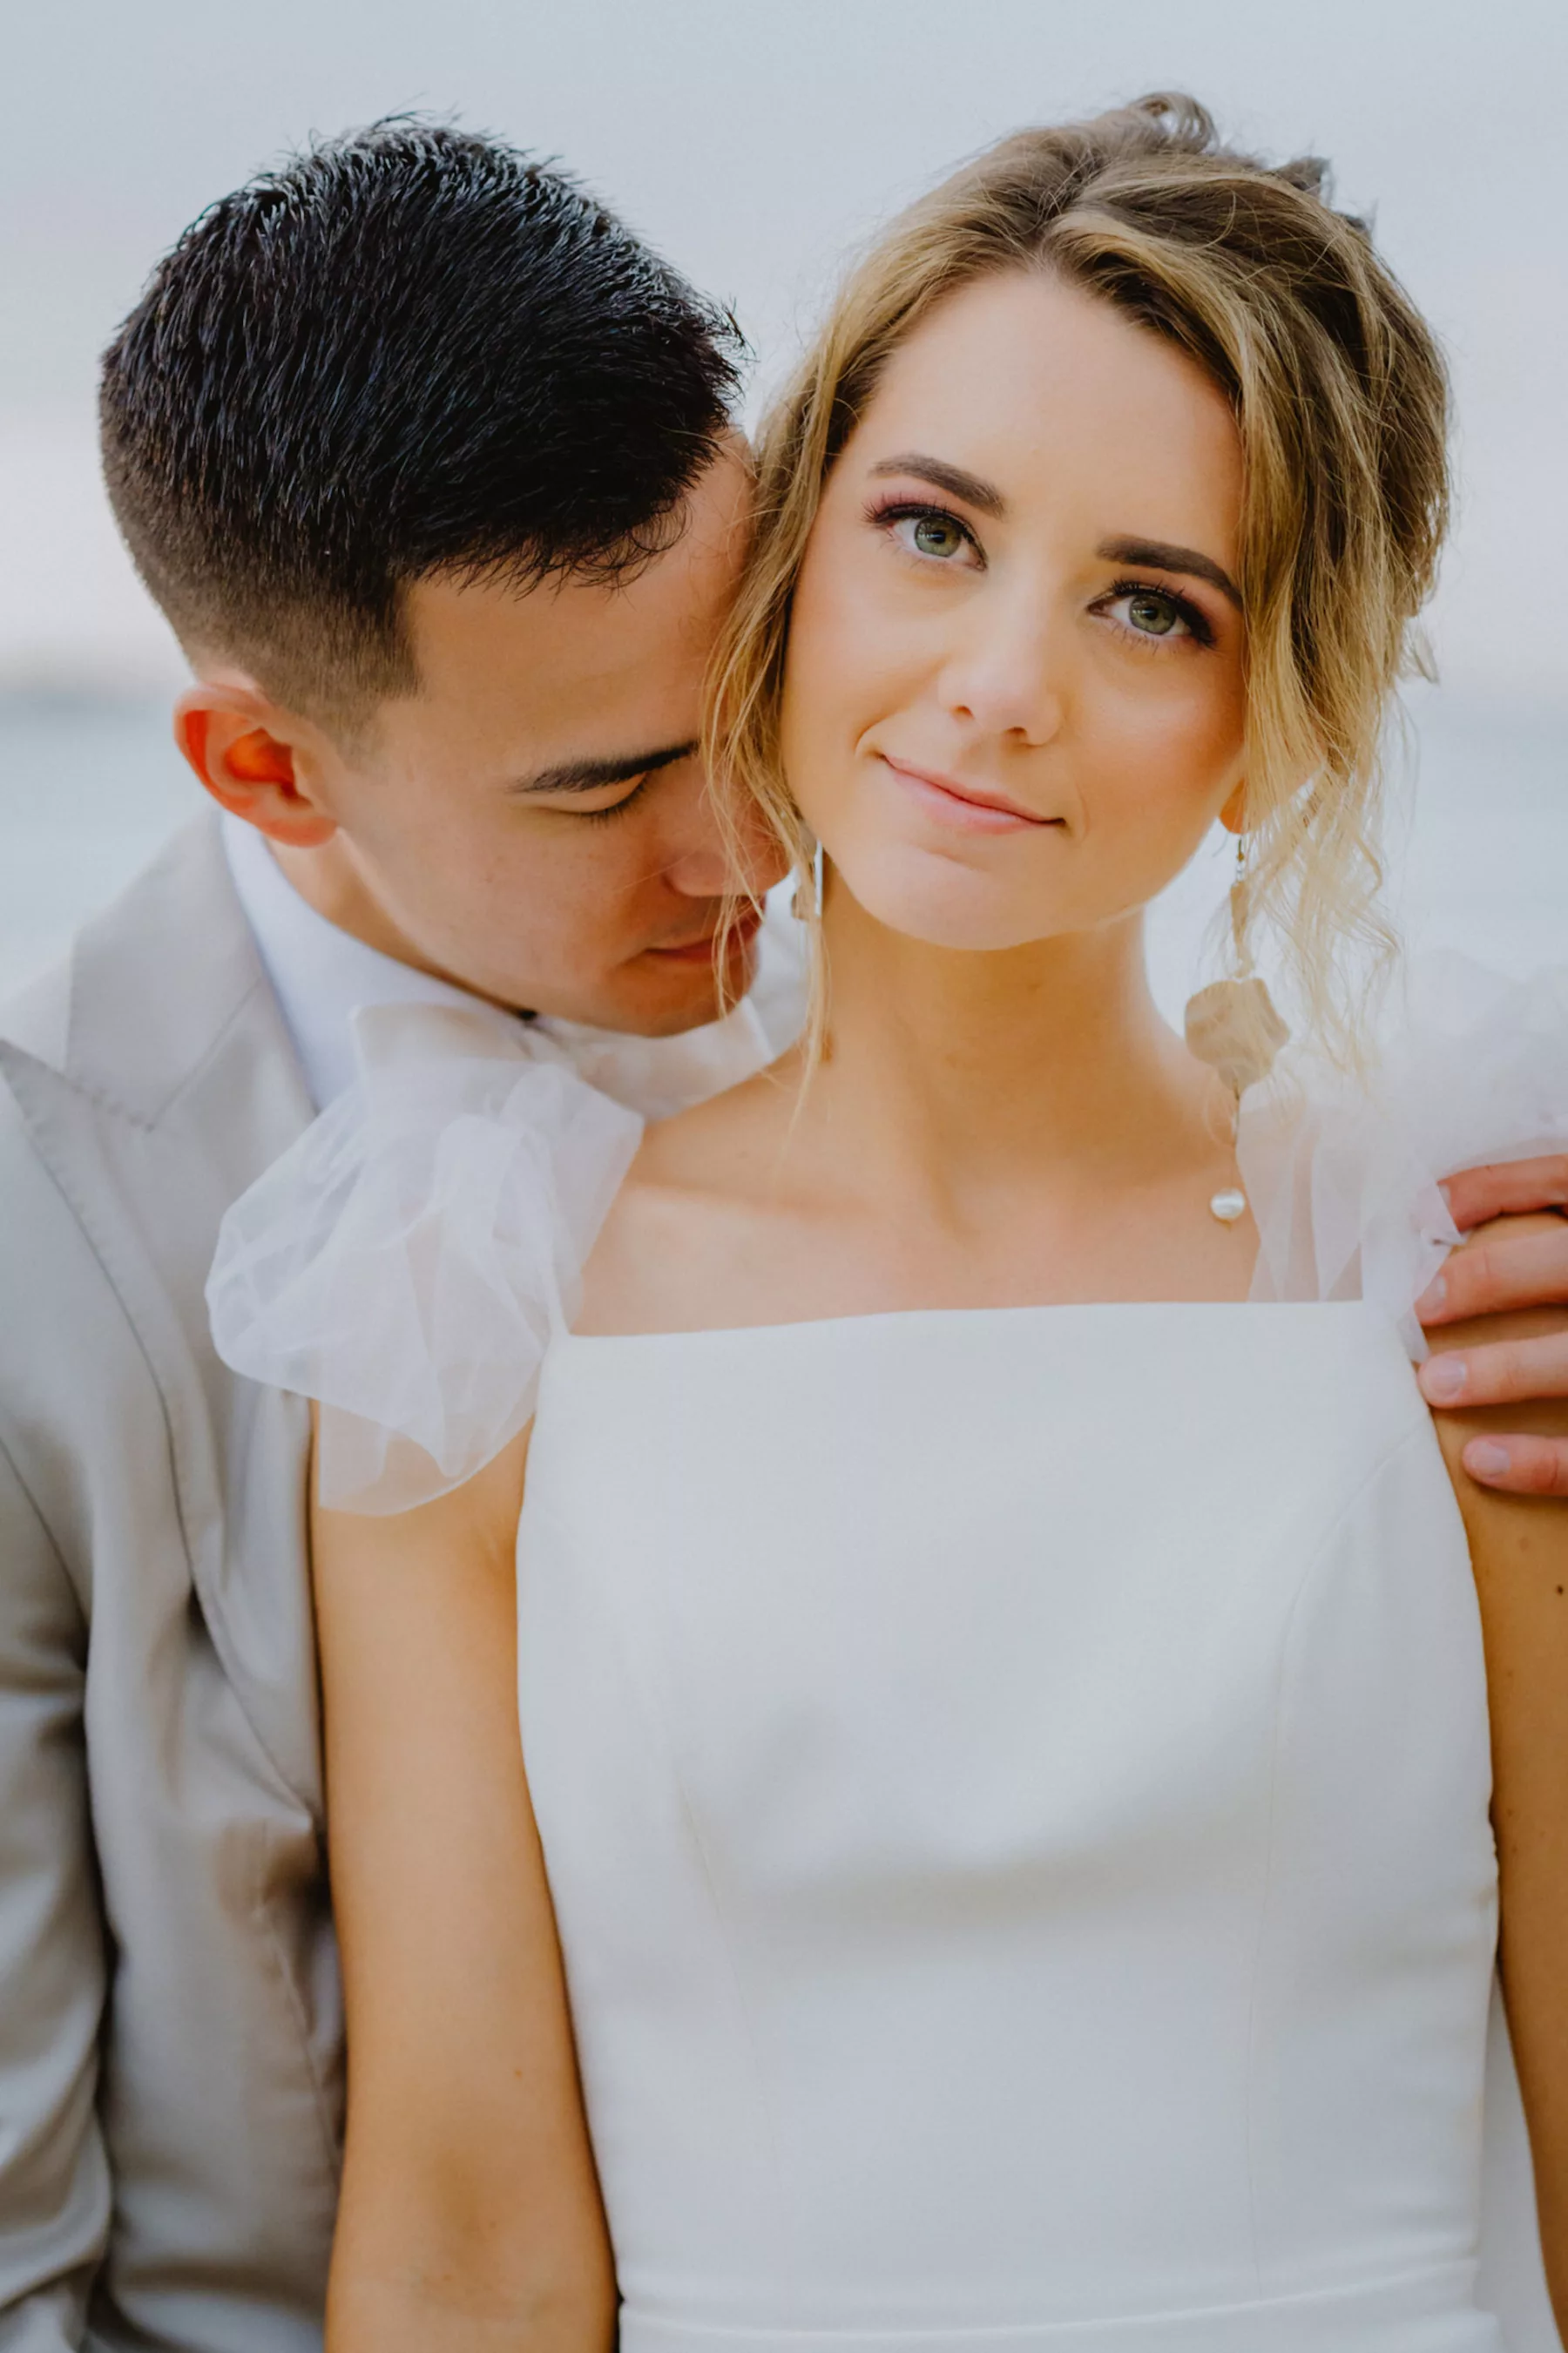 Intimate Bride and Groom Wedding Portrait | Beachy Bridal Hair and Makeup Inspiration | Tampa Bay Hair and Makeup Artist Adore Bridal | St Pete Photographer and Videographer Mars and the Moon Films